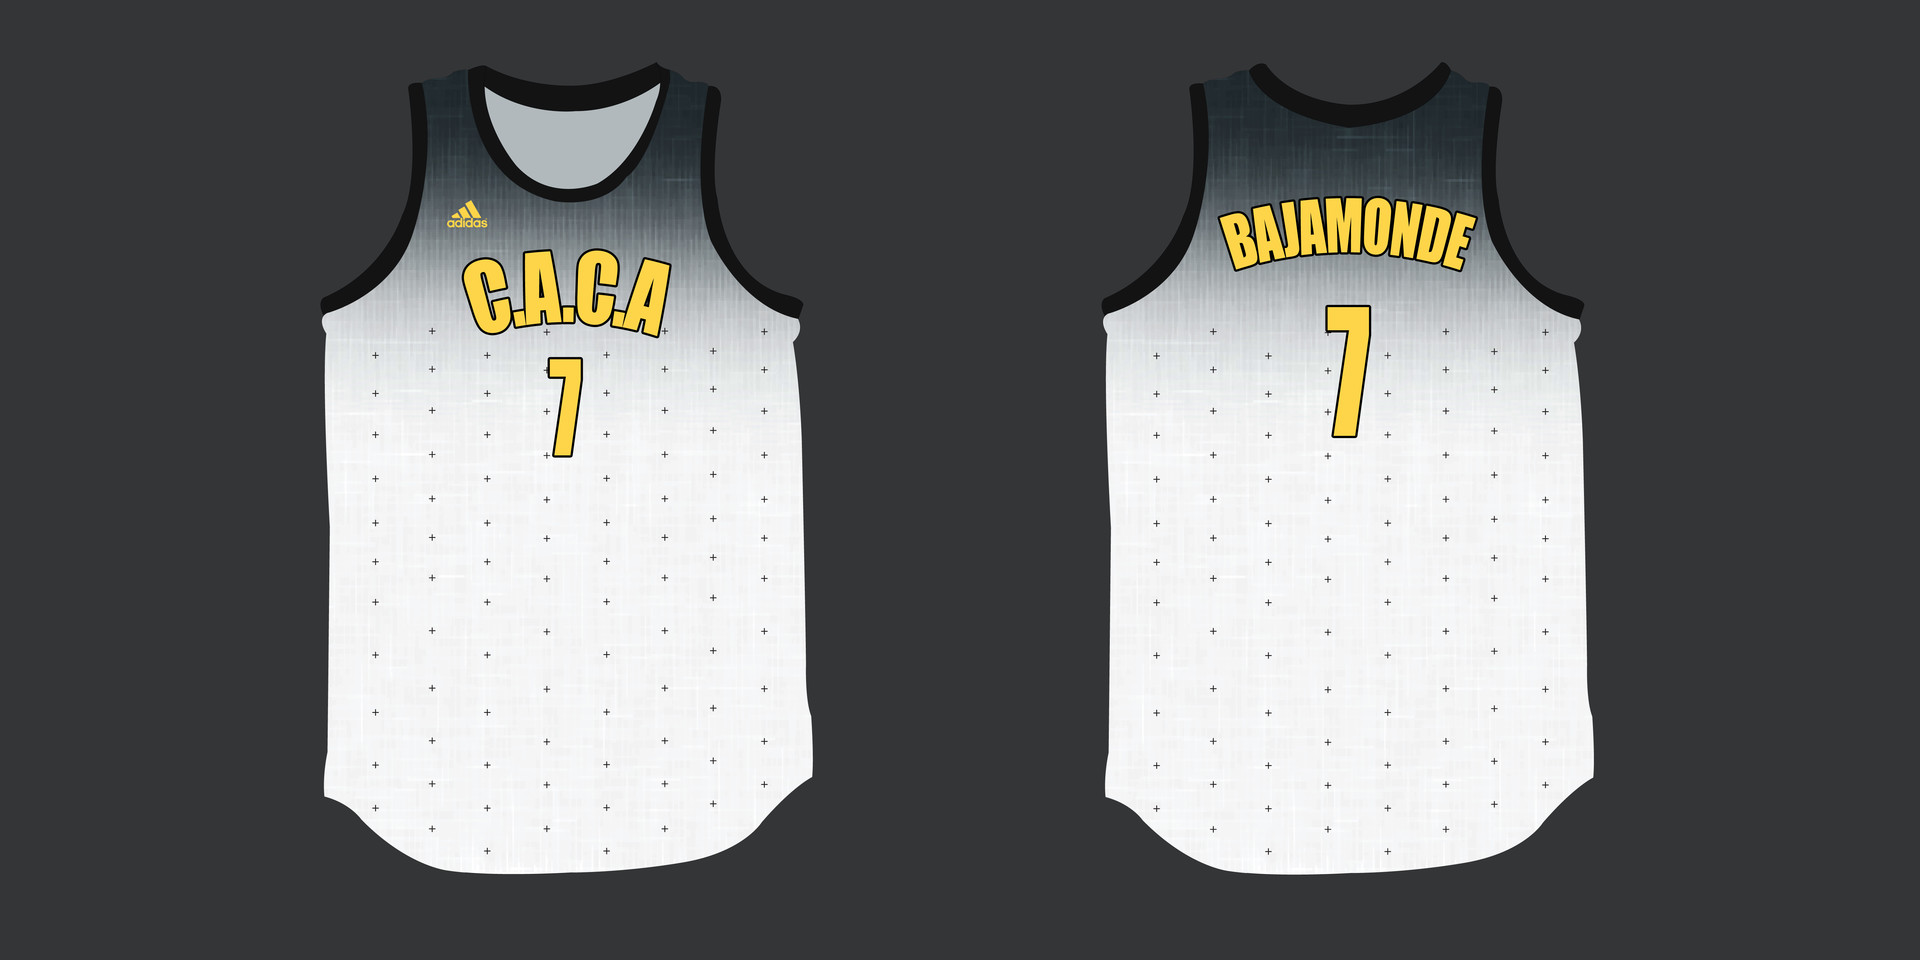 Aldrin Bacordio - C.A.C.A. Jersey Layout